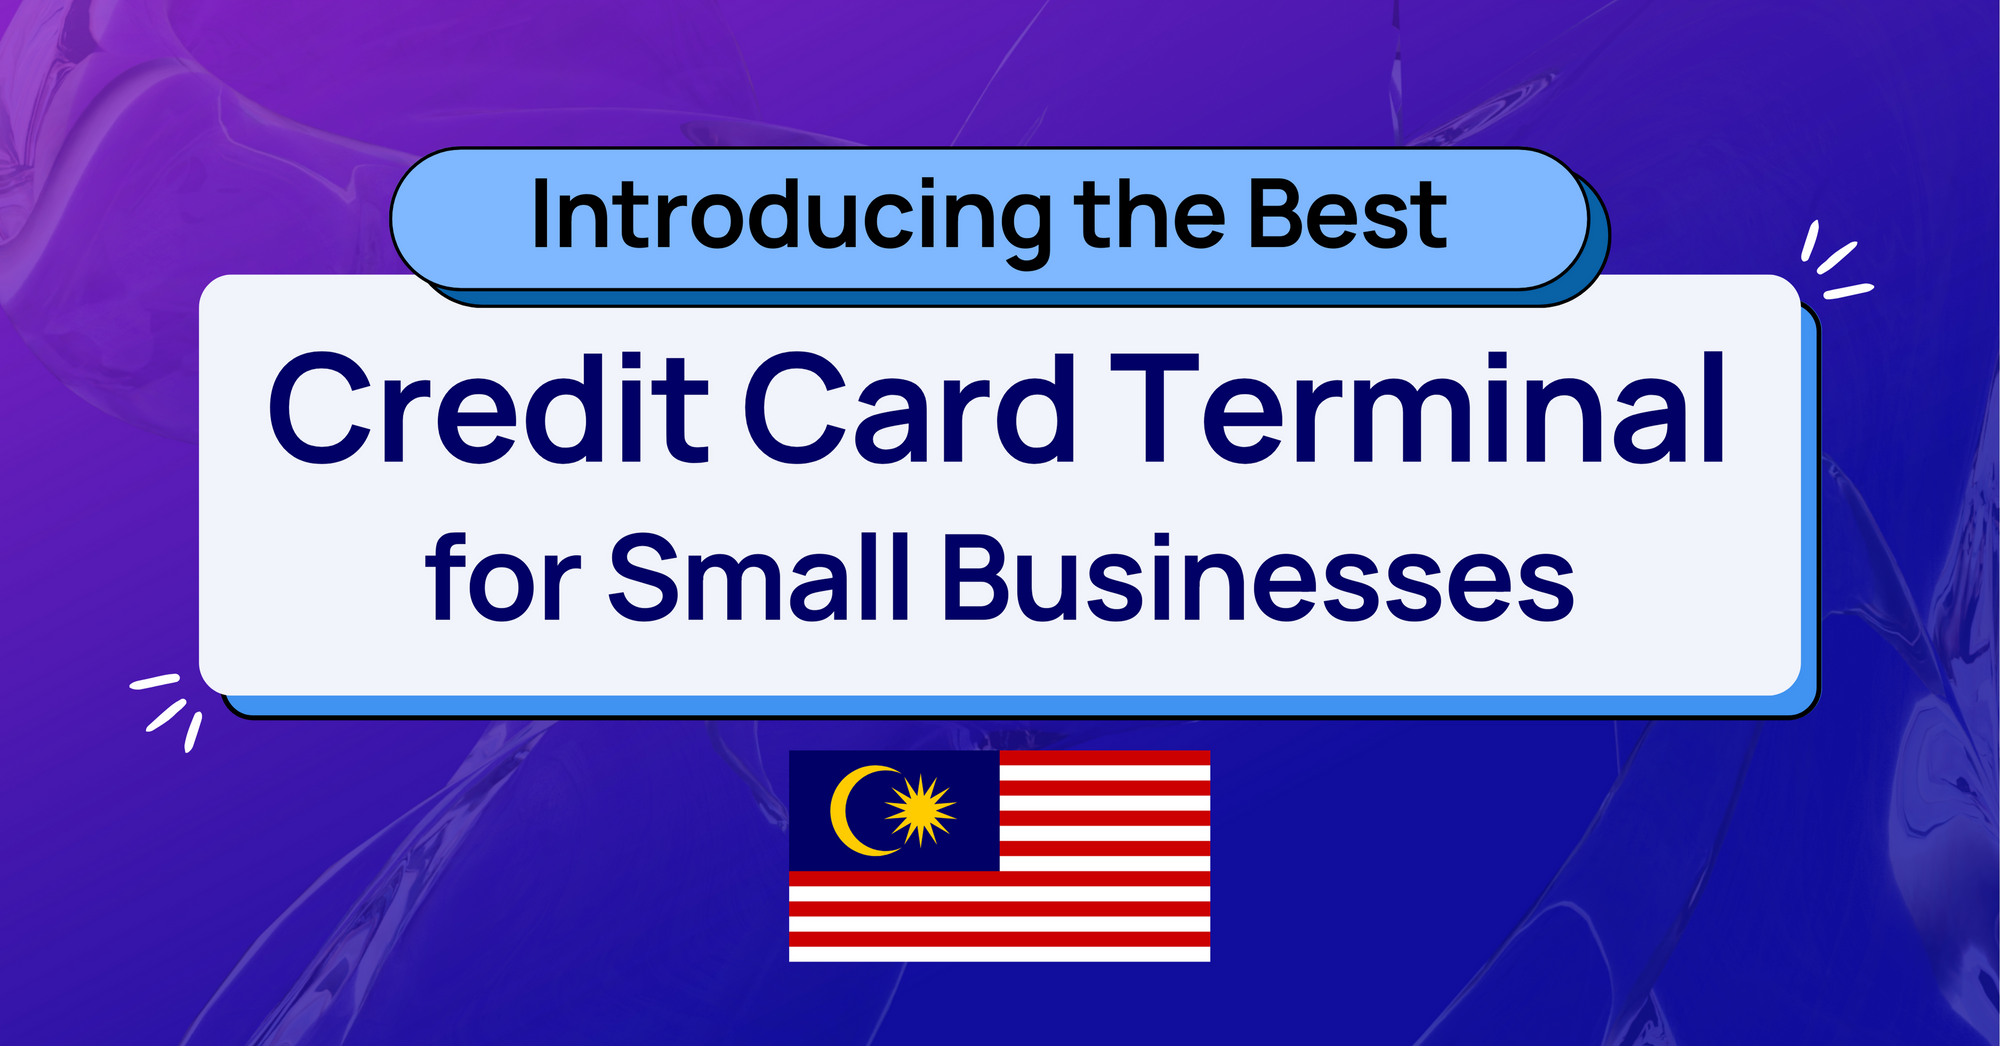 Introducing the Best Credit Card Terminal in Malaysia for Small Businesses